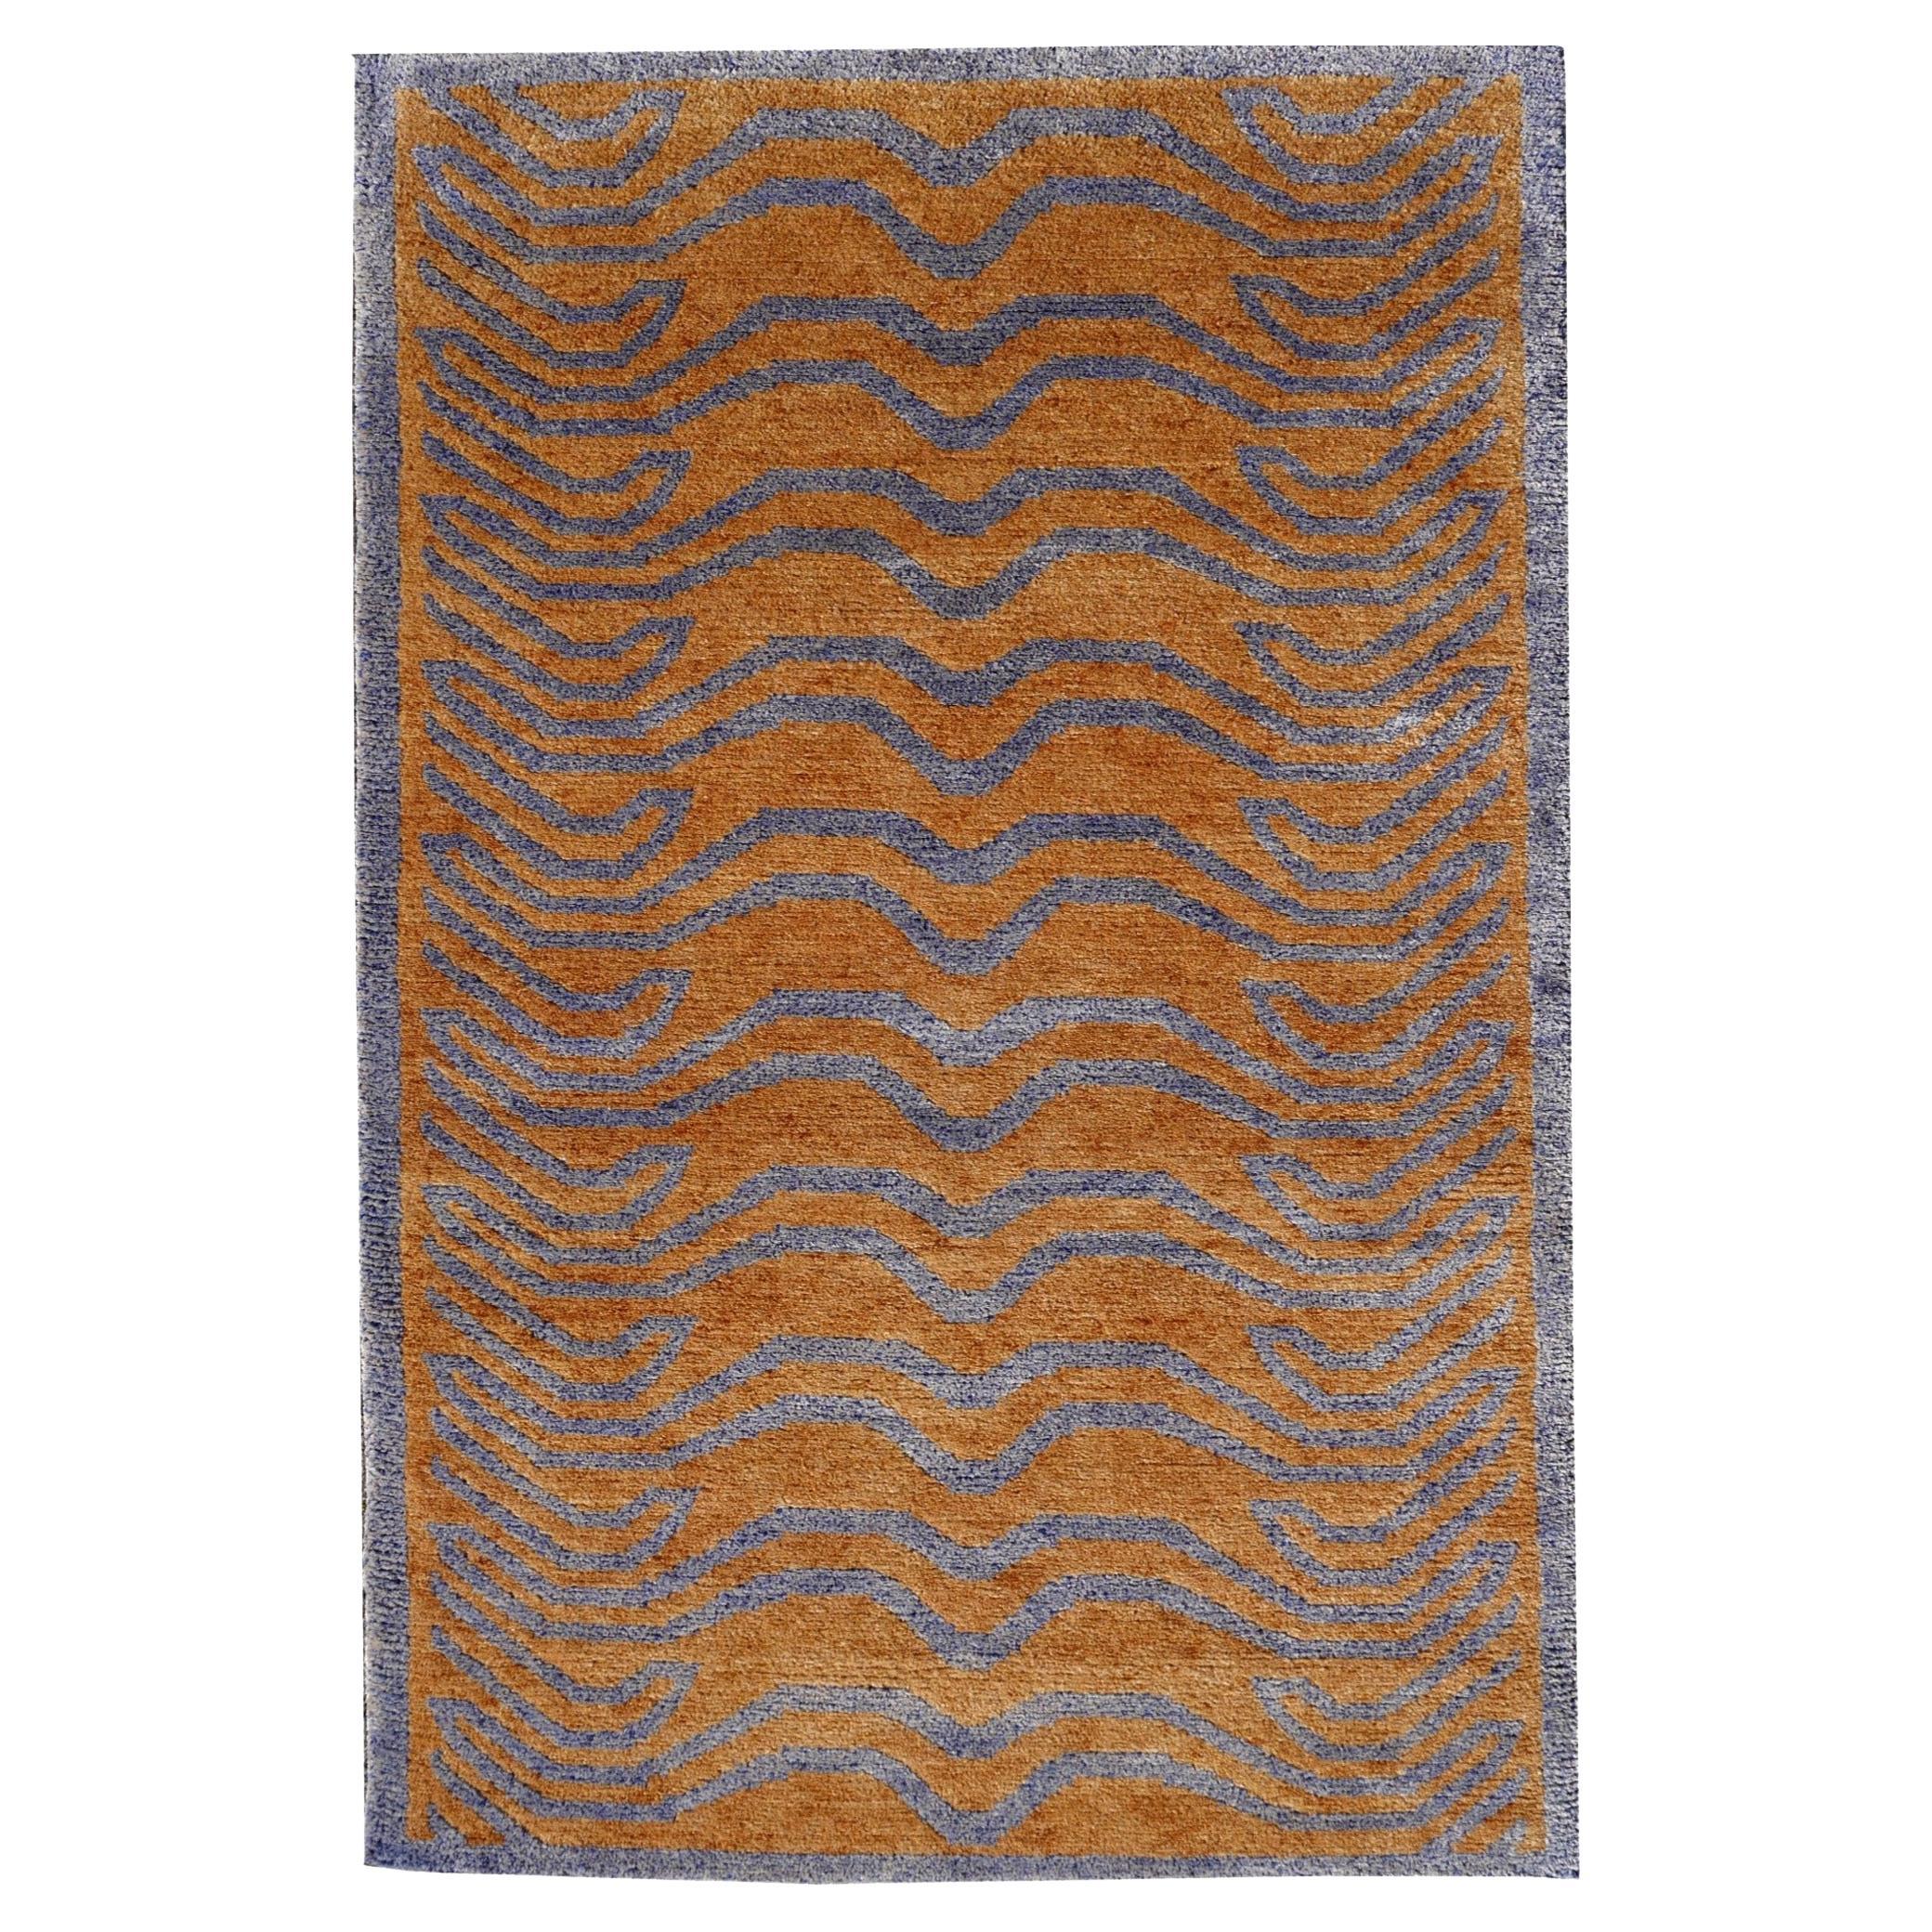 Tibetan Tiger Rug Hand Knotted Wool and Silk Gold Blue by Djoharian Collection